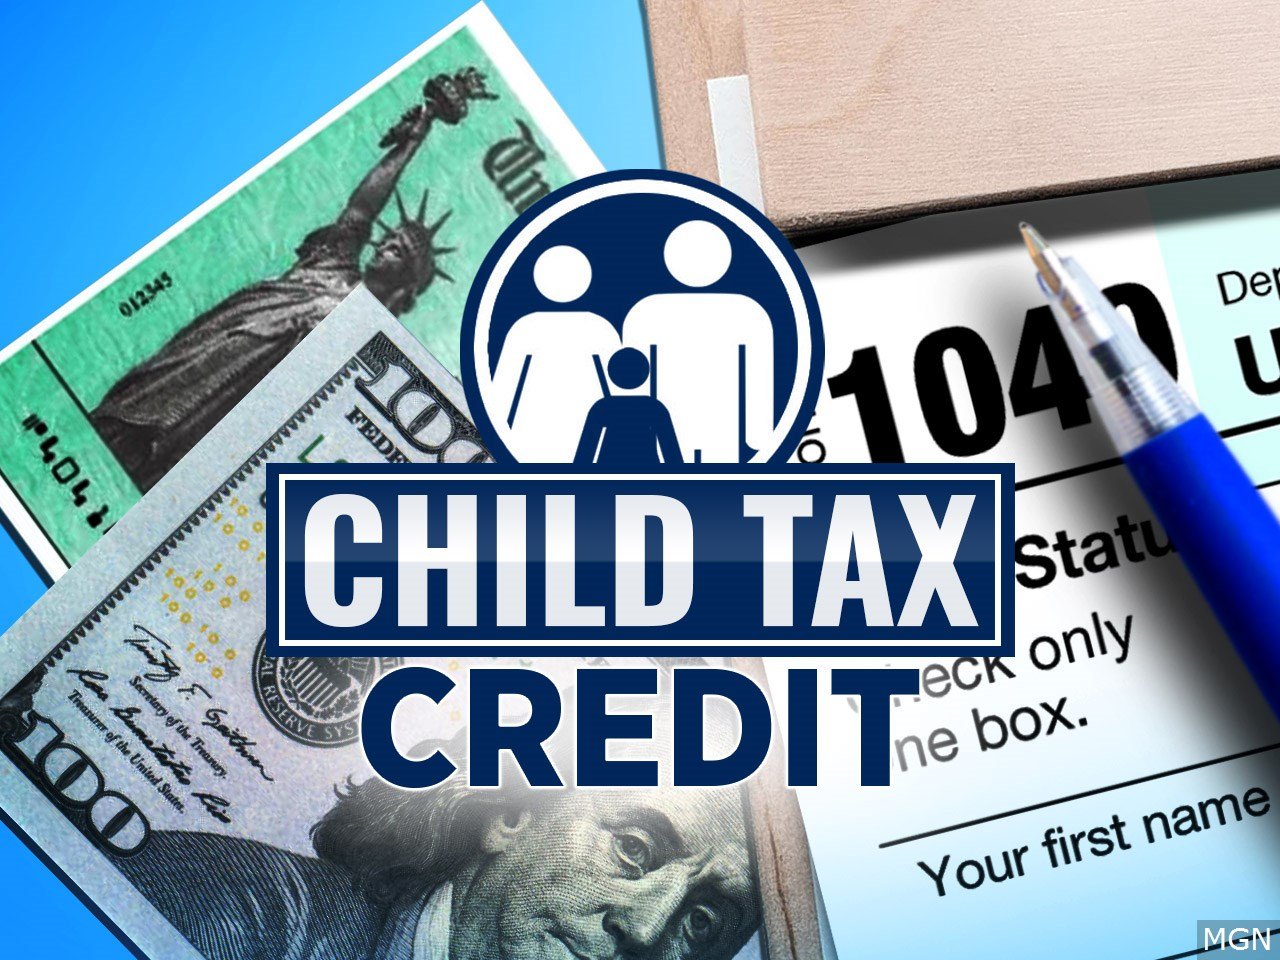 Eligible families receive 15 Billion from Child Tax Credit